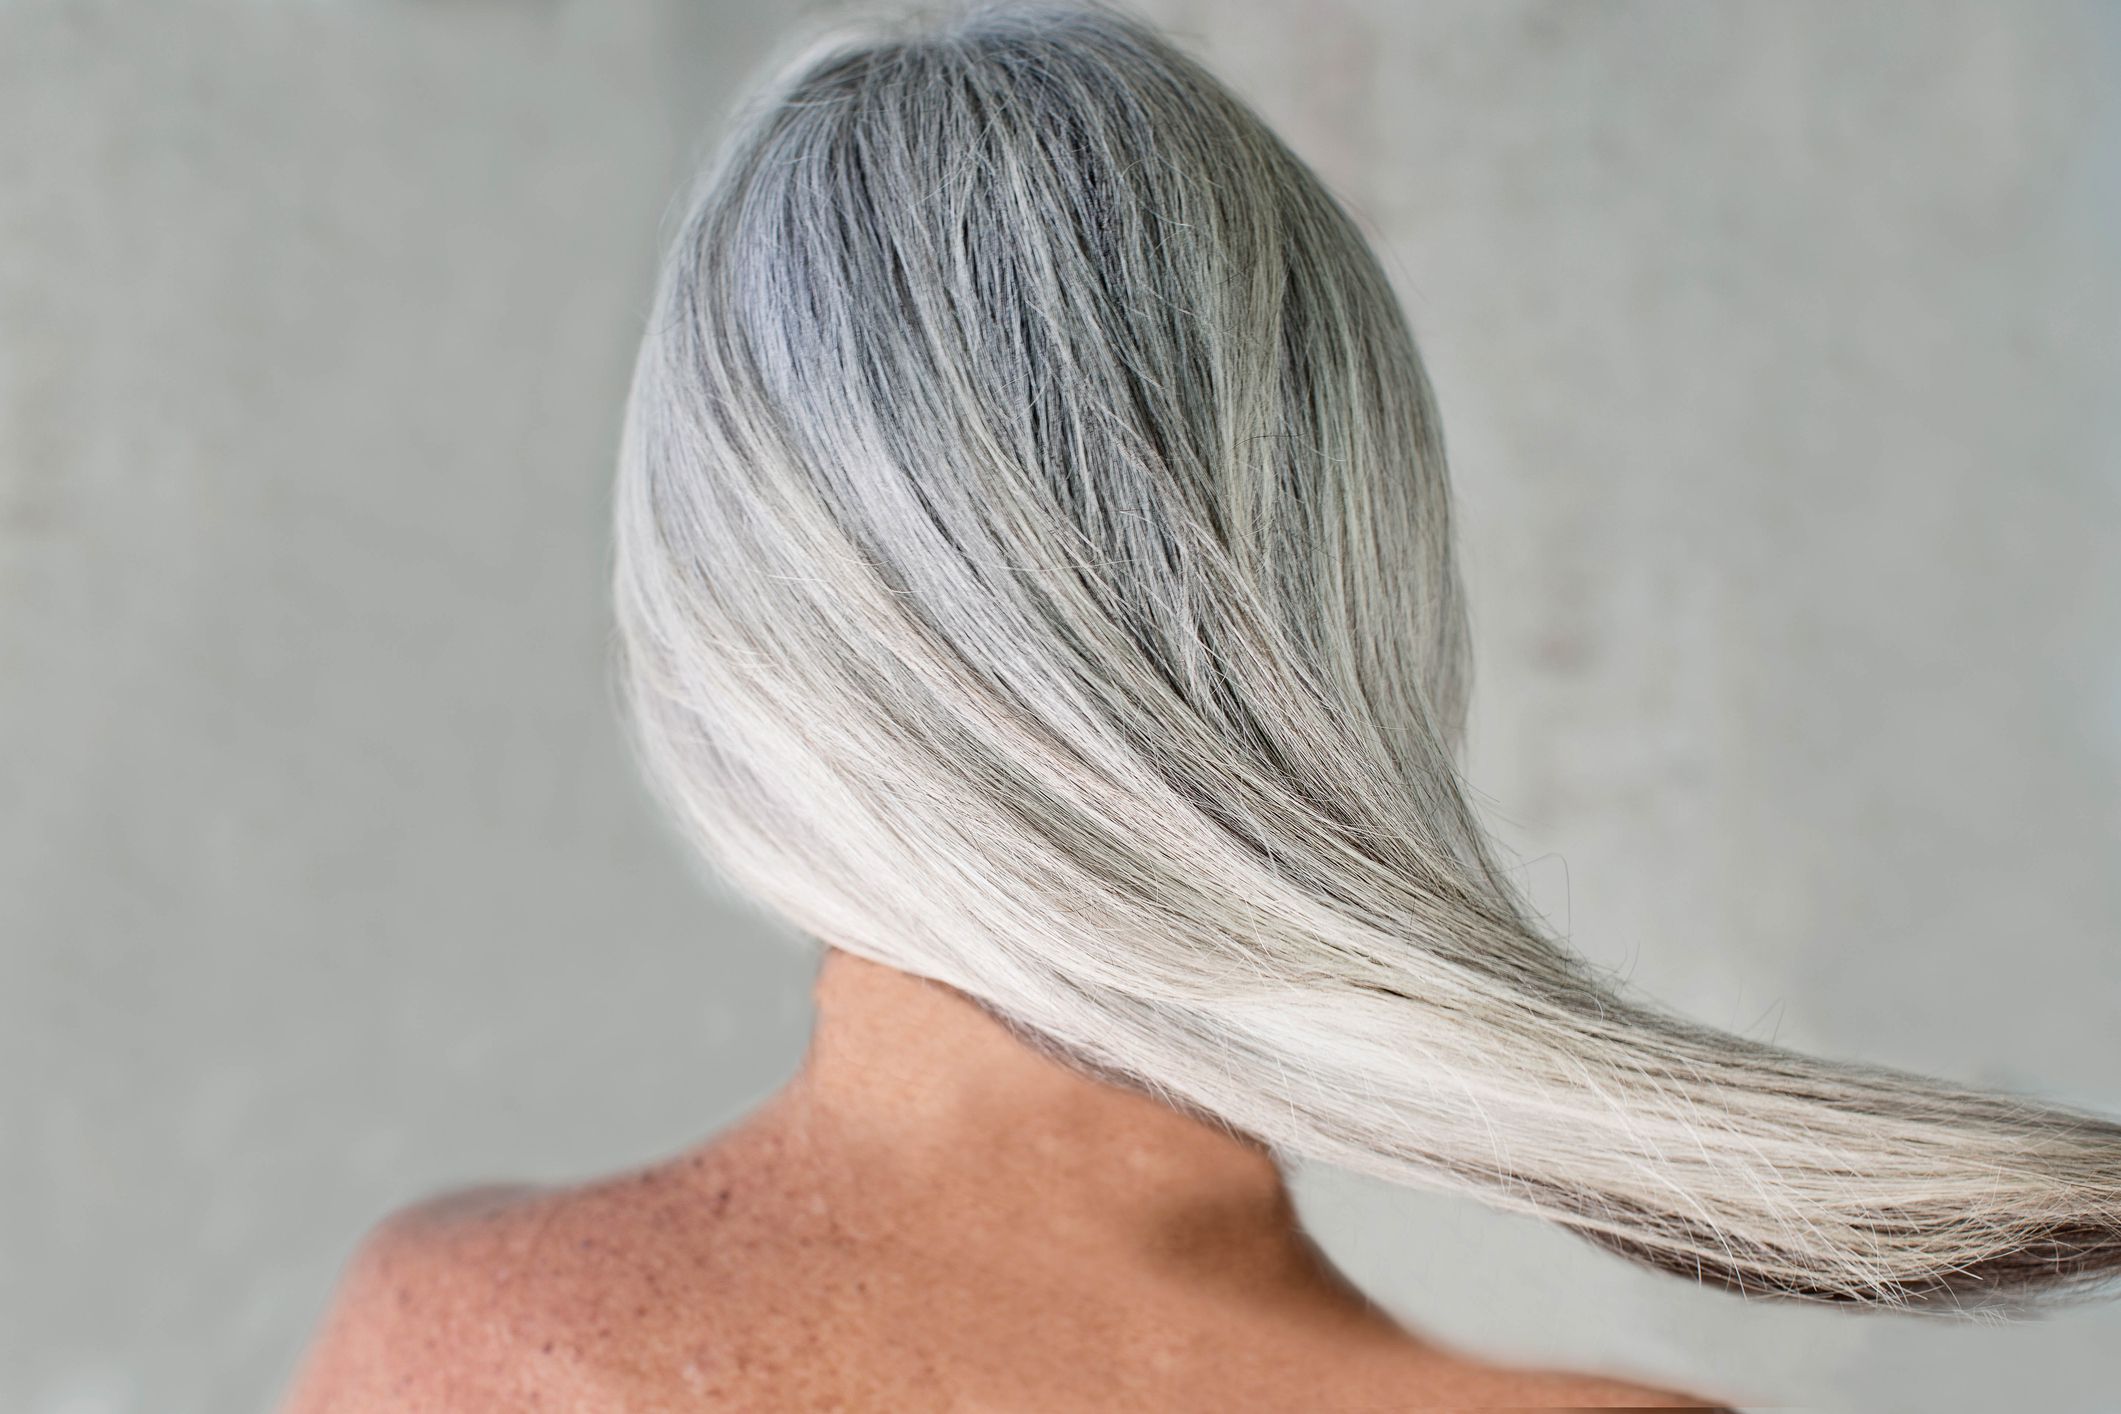 Gone Gray How To Care For Your Hair